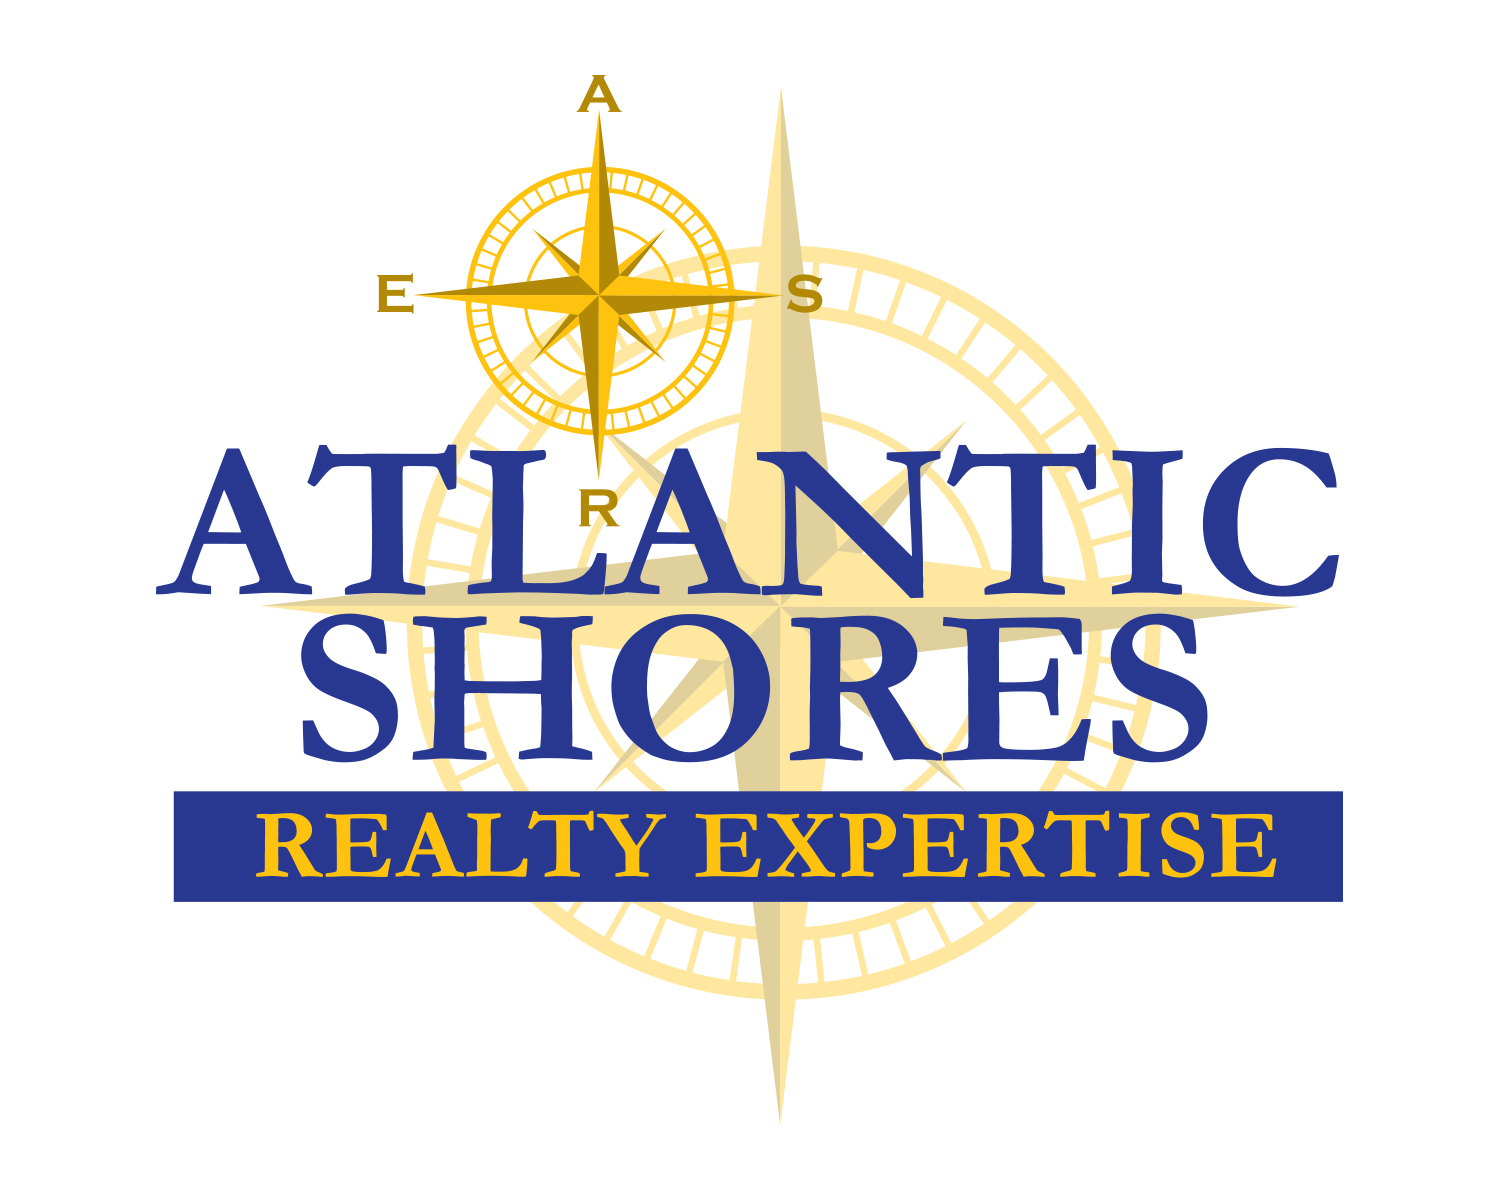 Atlantic Shores Realty Expertise